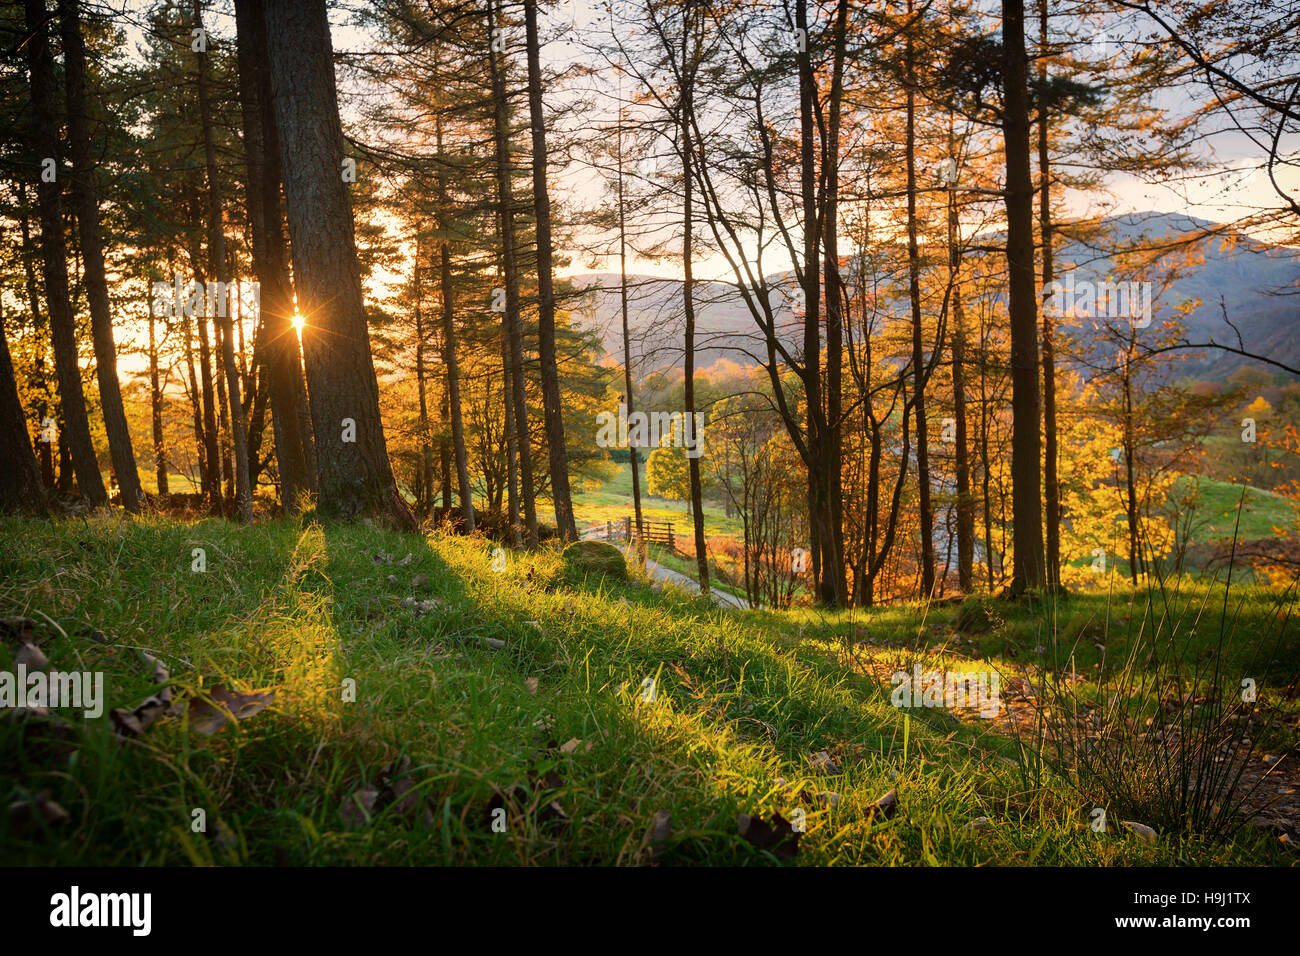 Larch Trees Back Lit by Setting Sun in a Forest at Tarn Hows in the Lake District, England. Stock Photo